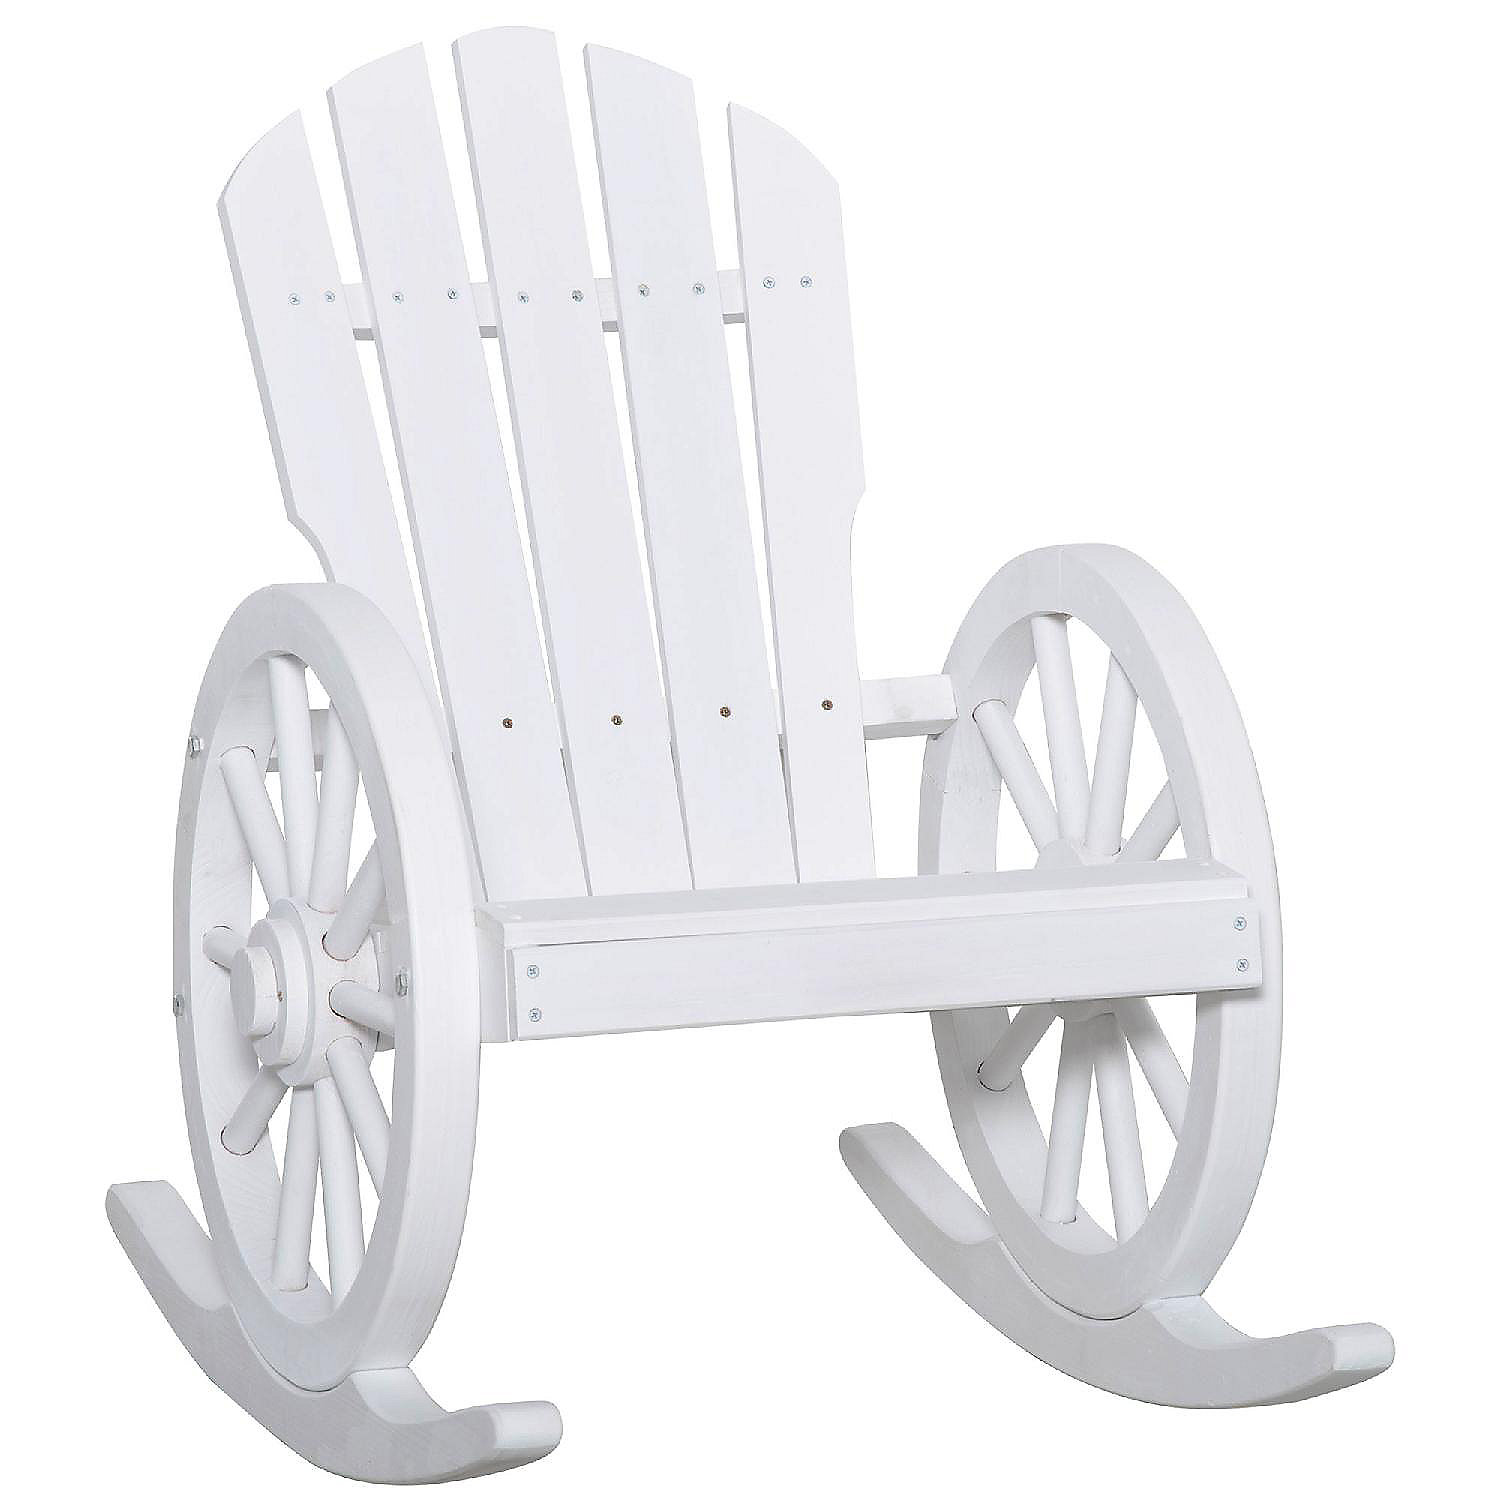 Outsunny Adirondack Rocking Chair with Slatted Design and Oversize Back for Porch Poolside or Garden Lounging 